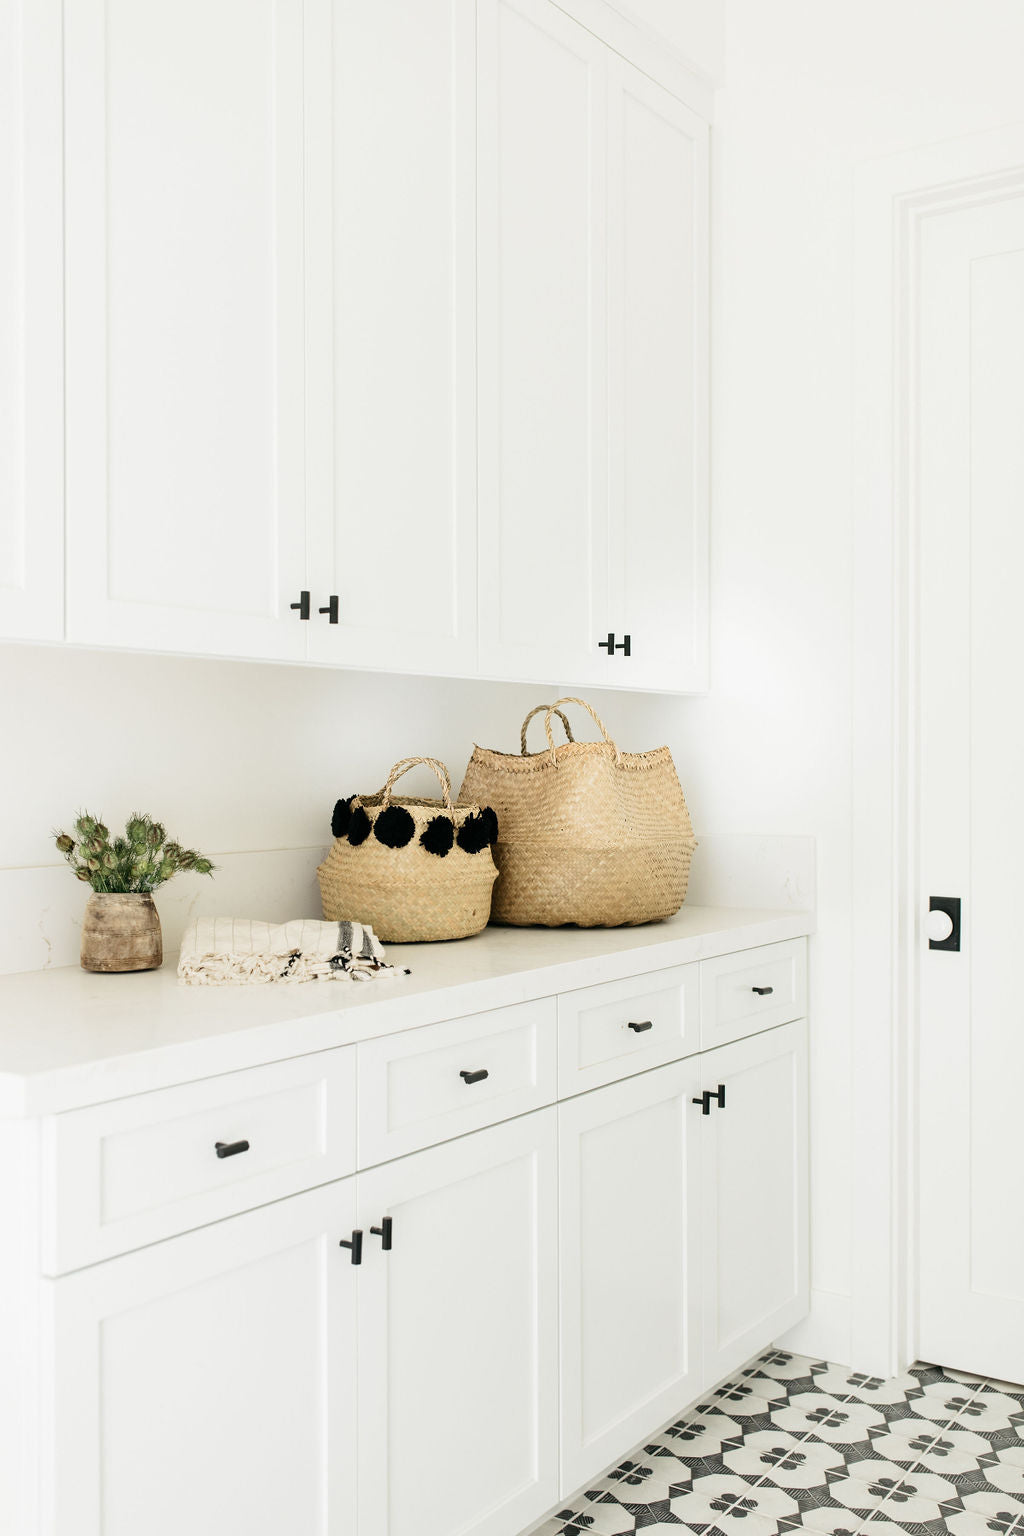 E.Design Now Available for the Laundry Room